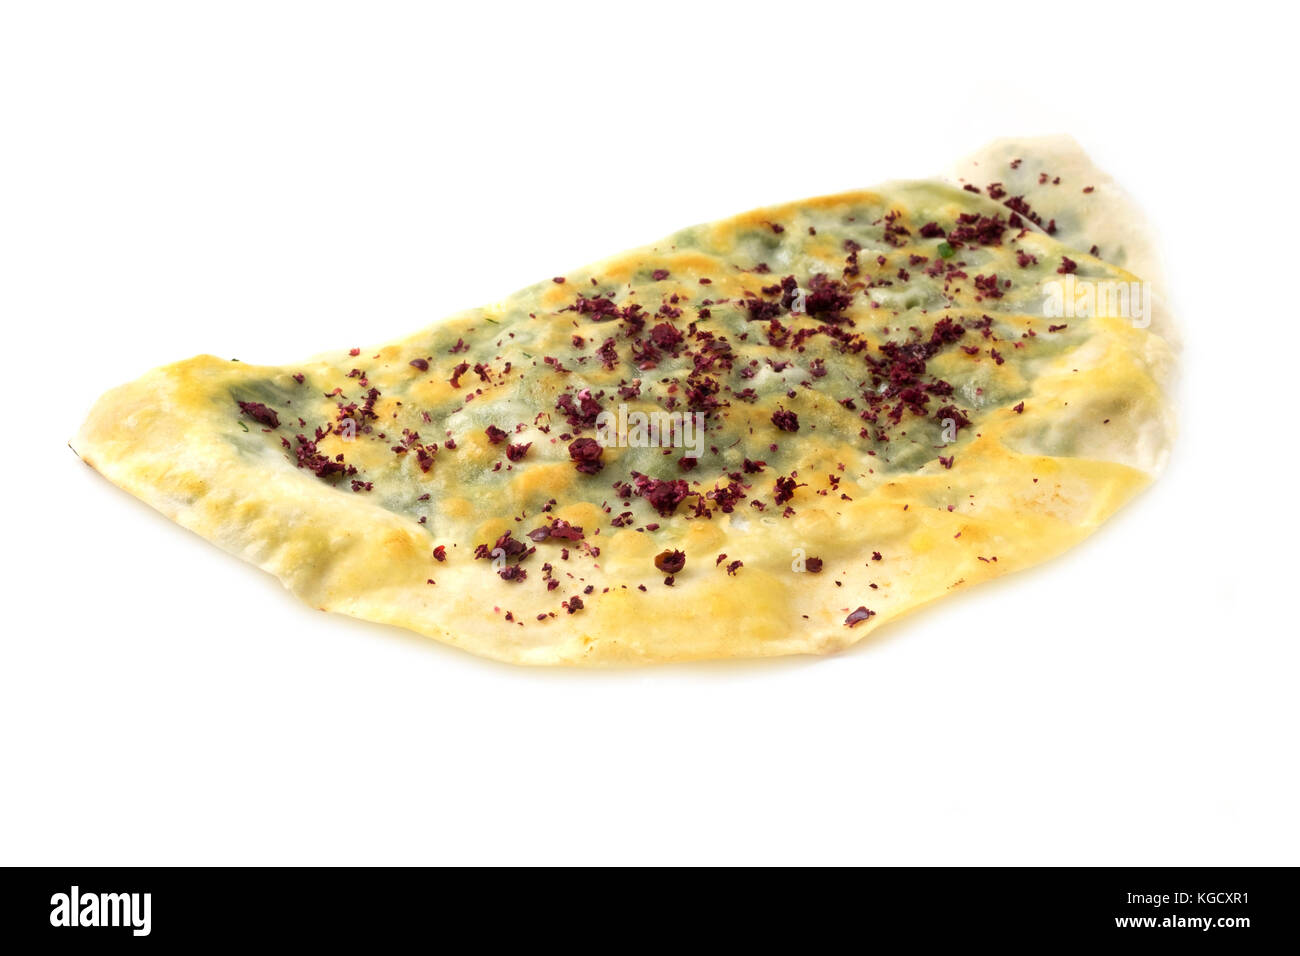 Azerbaijani Yashil Qutab (rolled dough filled with greens) with Sumac on a white background Stock Photo